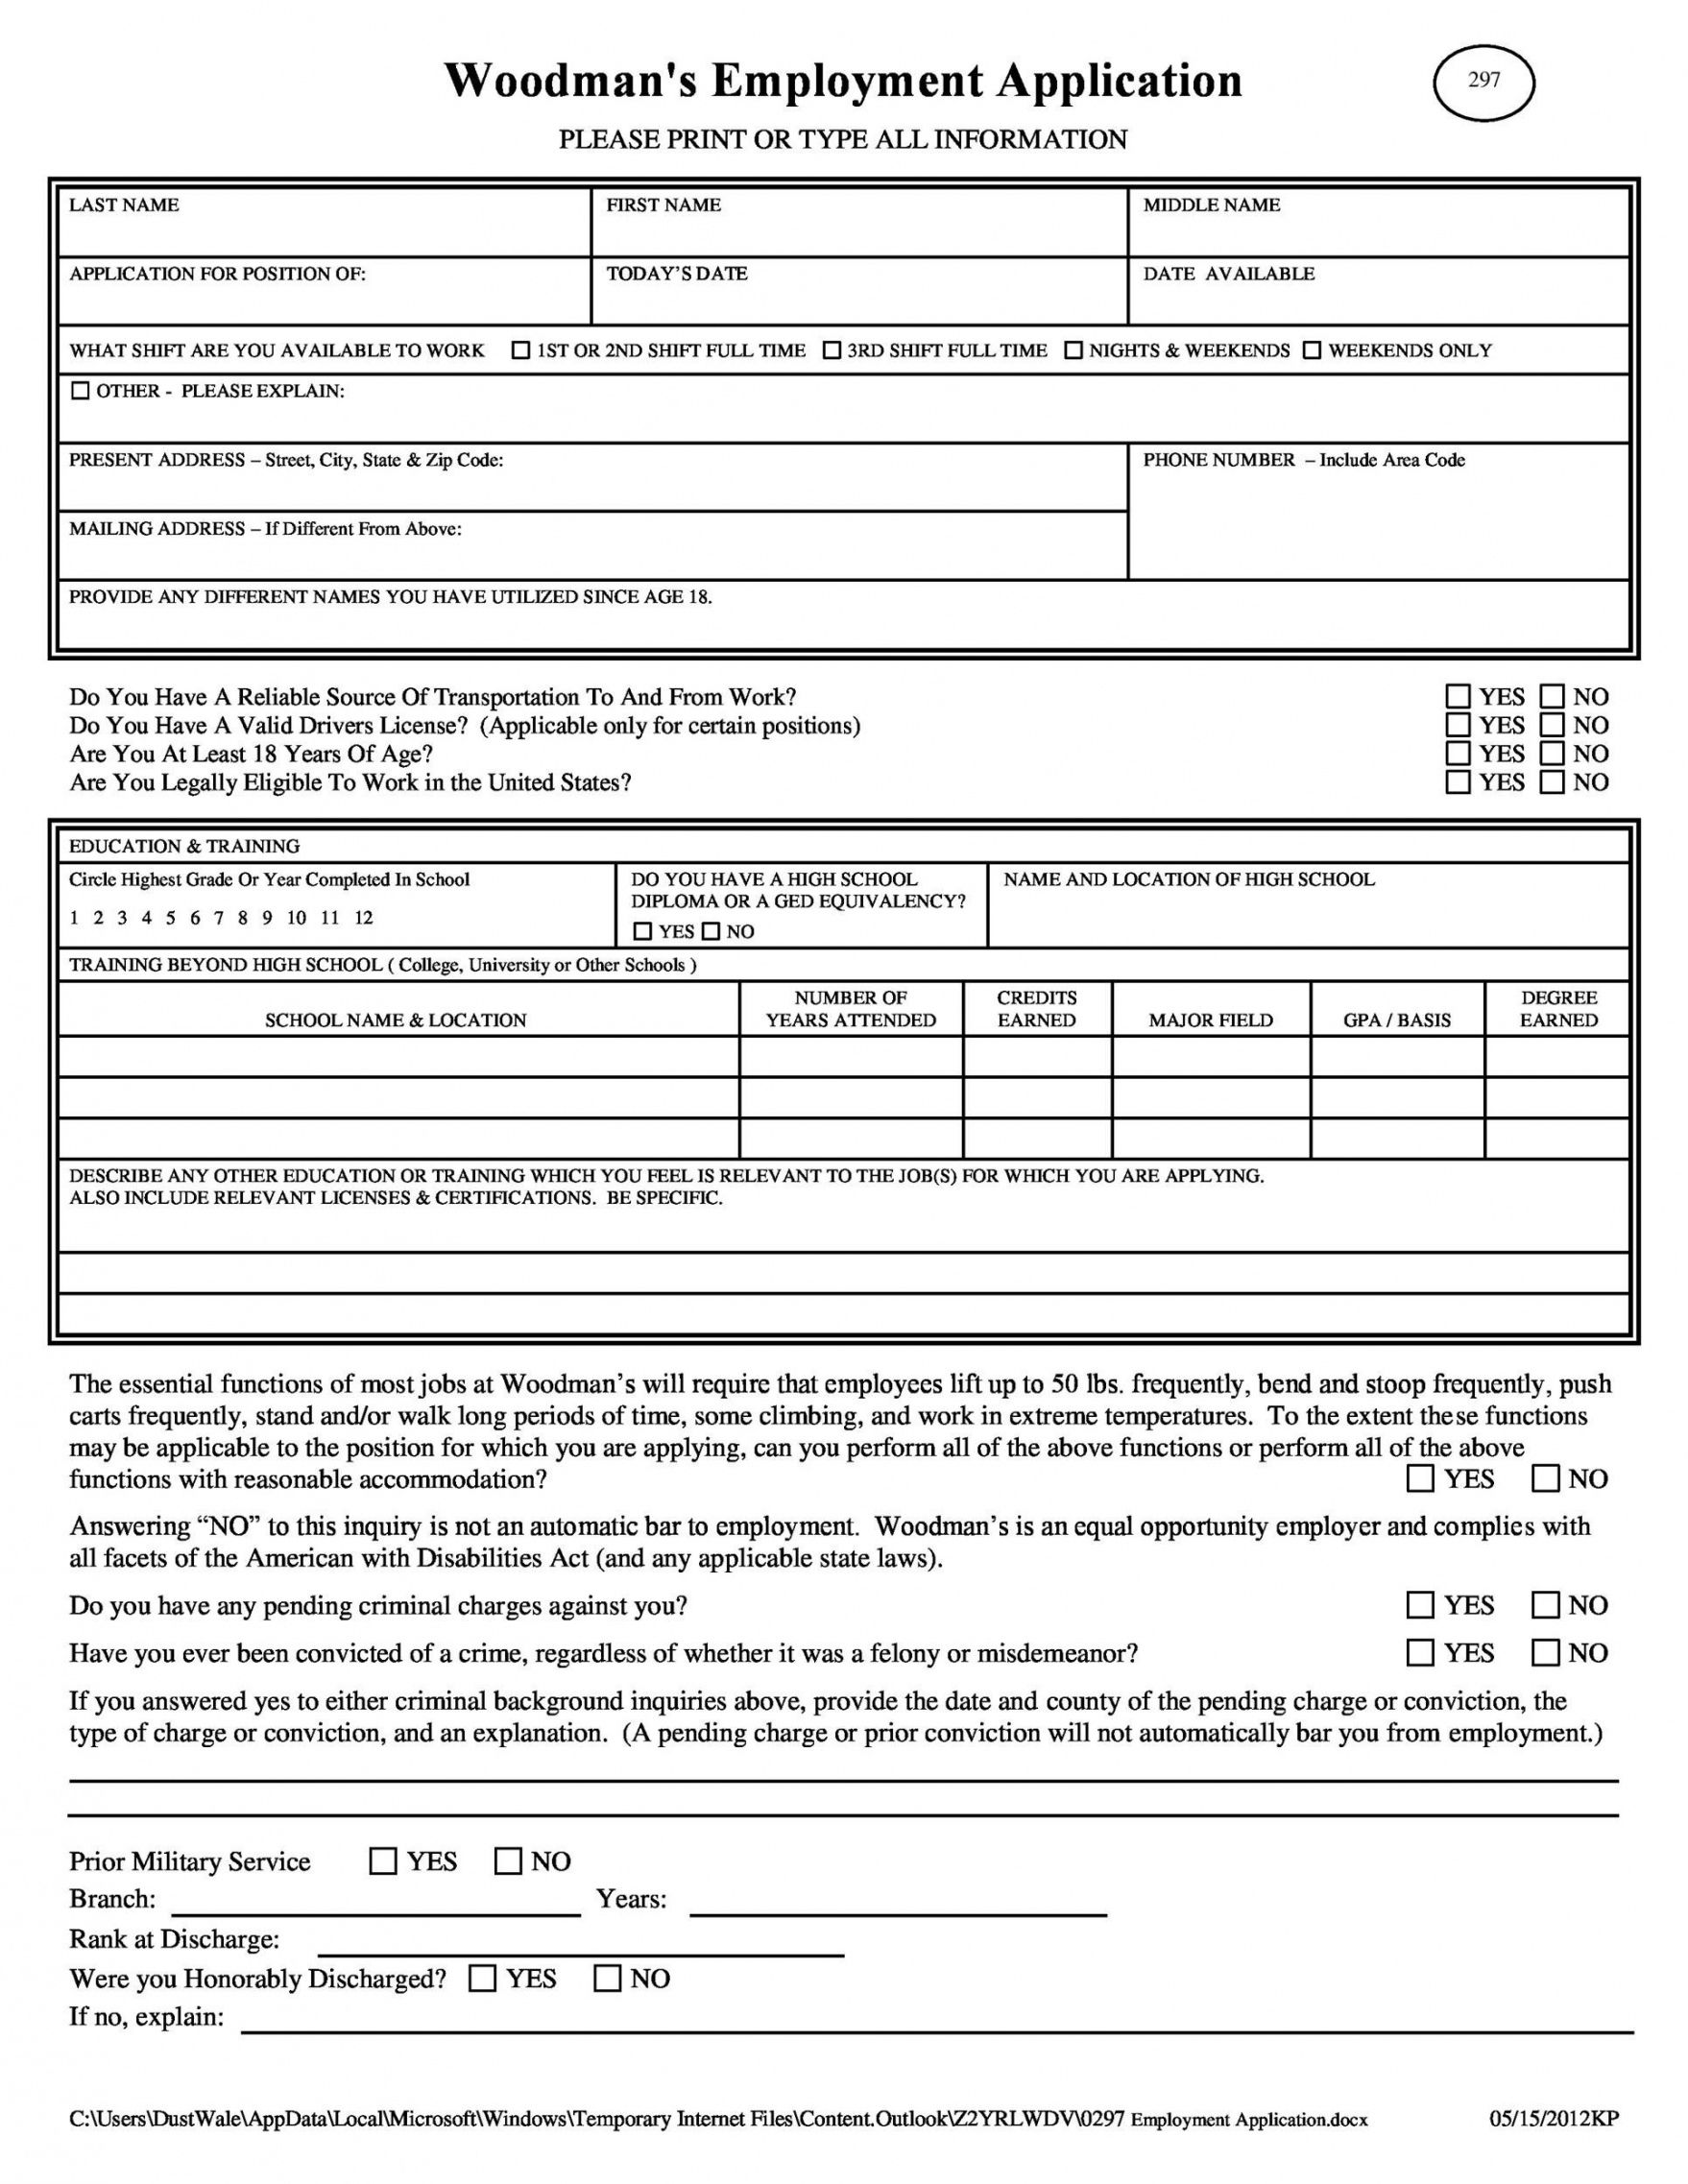 Standard Job Application Form Template Word Example